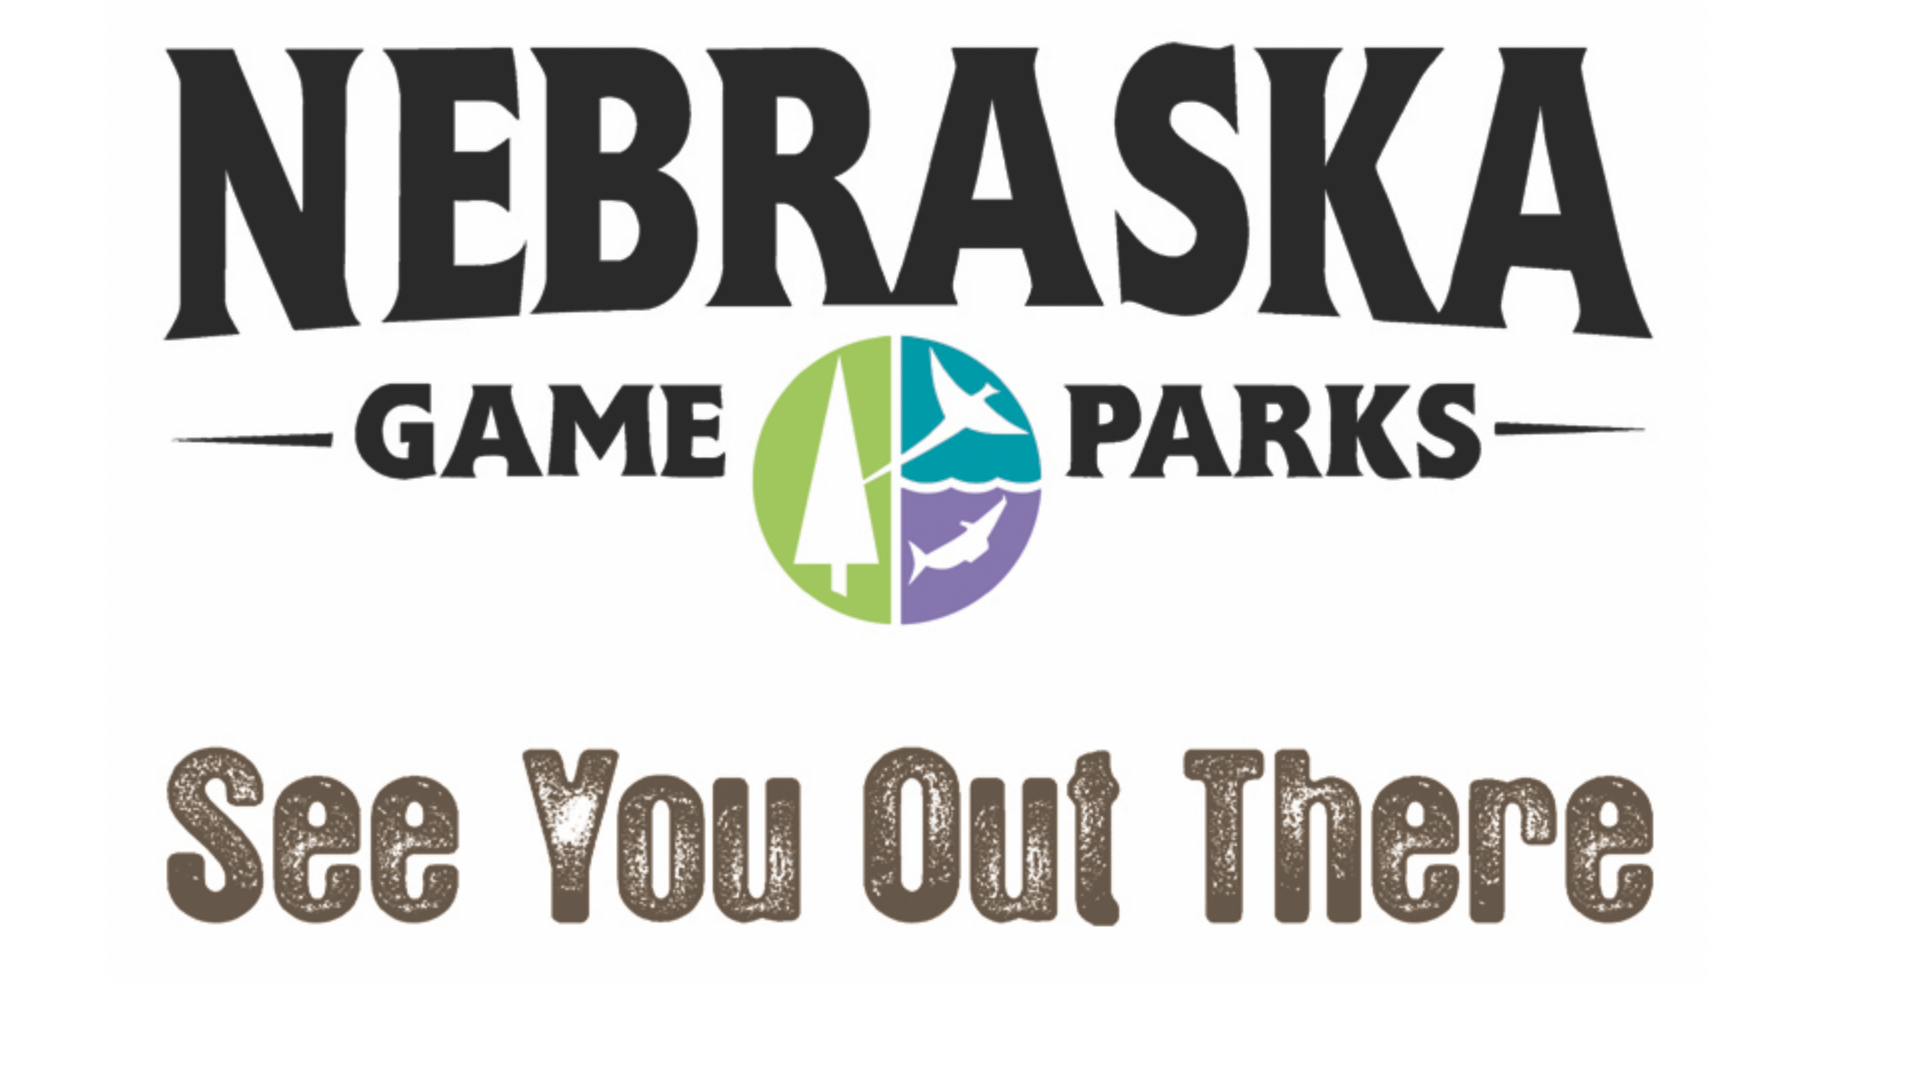 Nebraska Game and Parks logo with the text "see you out there" underneath